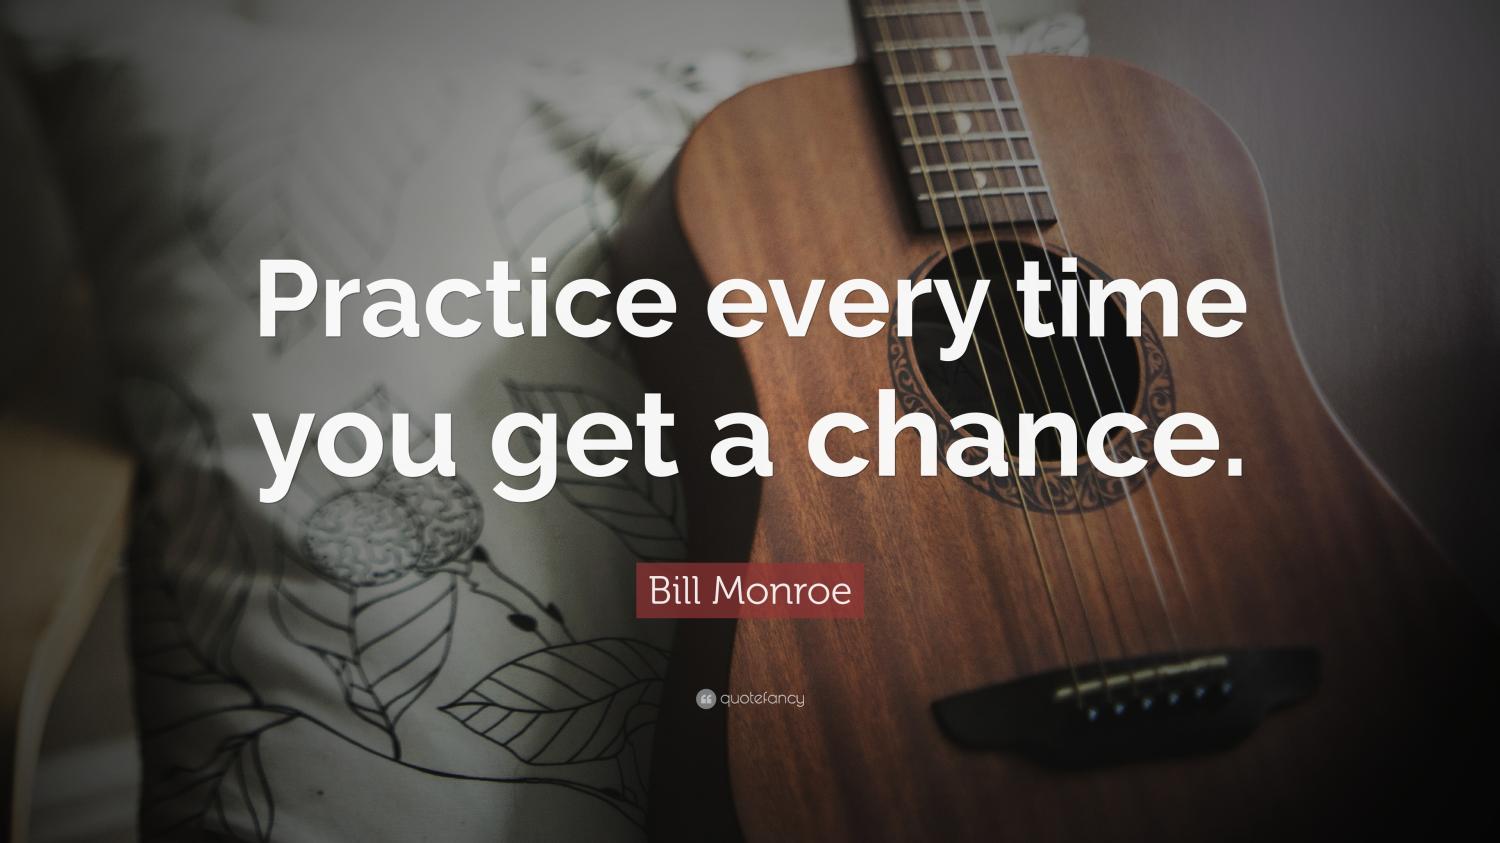 https://cdn.noron.vn/2022/07/29/2000919-bill-monroe-quote-practice-every-time-you-get-a-chance-1659080644.jpg